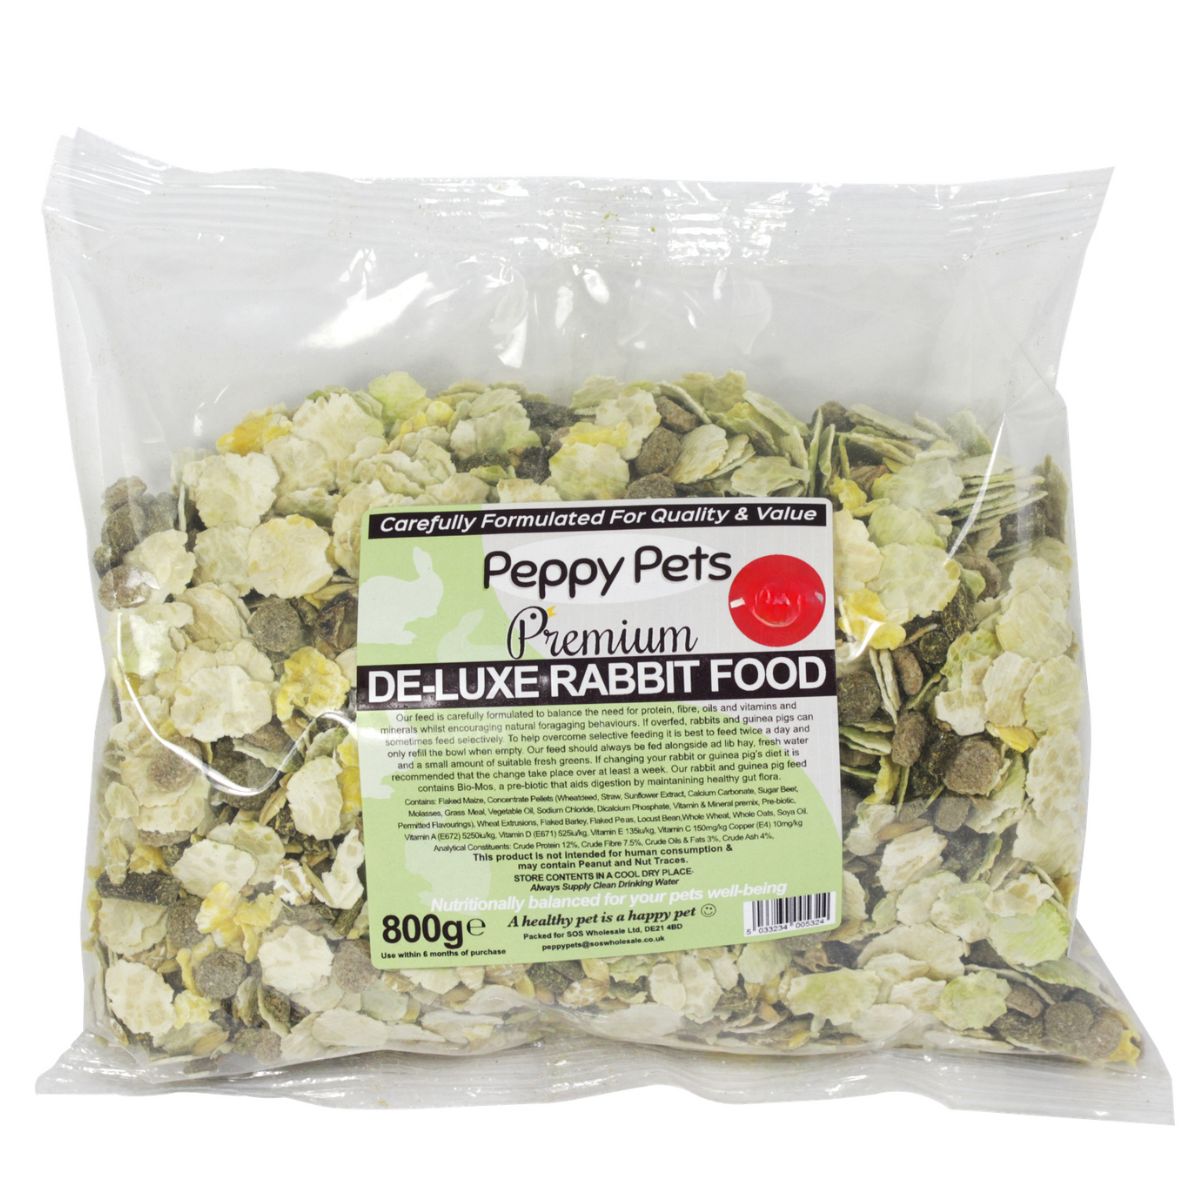 A bag of Peppy Pets - Deluxe Rabbit Food - 650g.